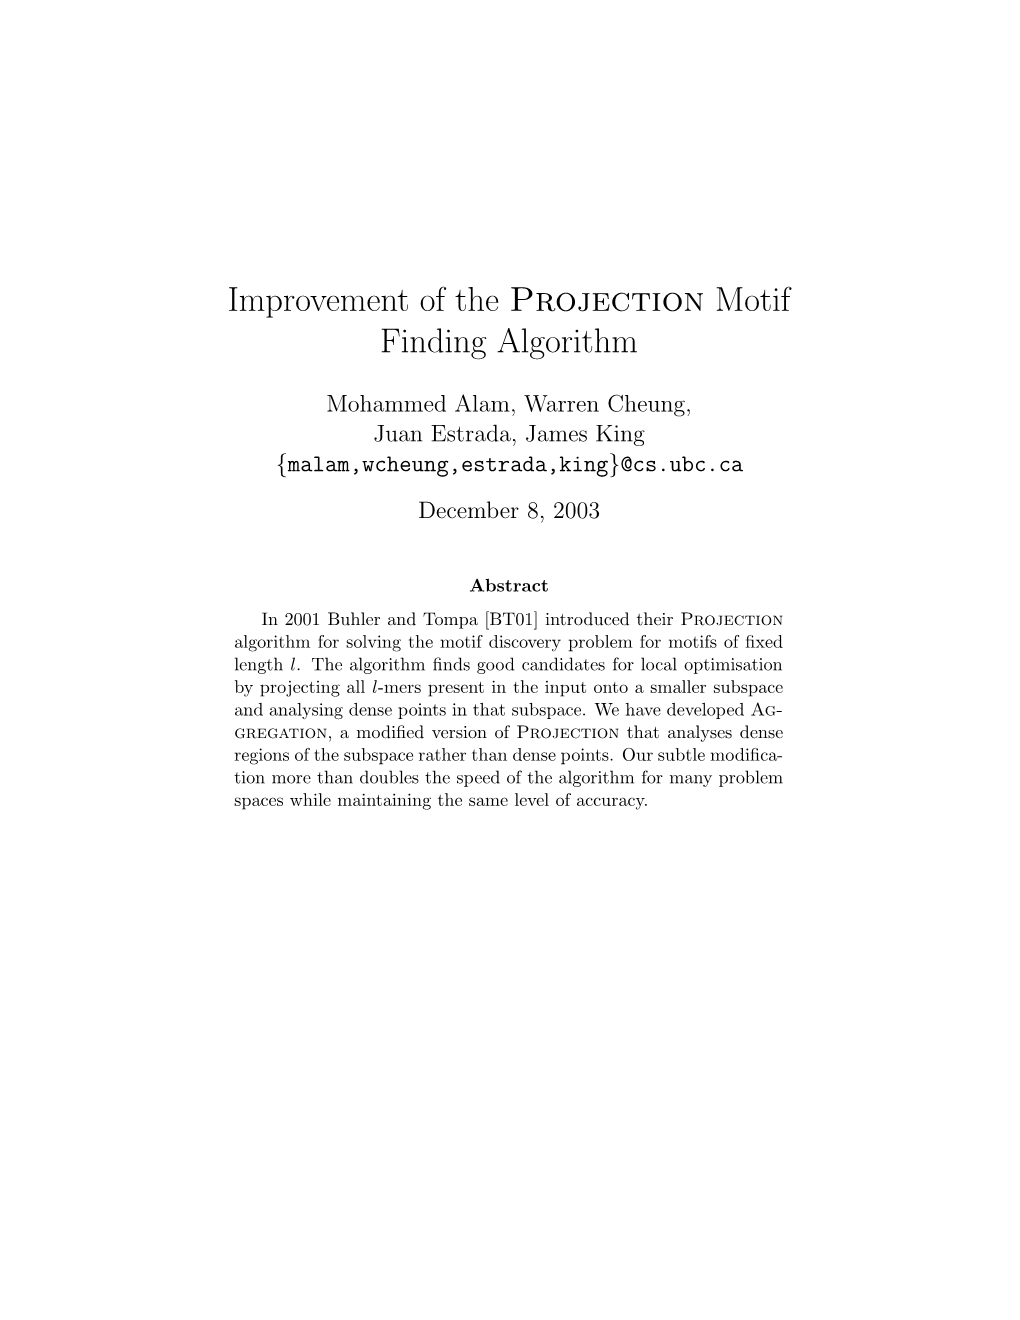 Improvement of the Projection Motif Finding Algorithm